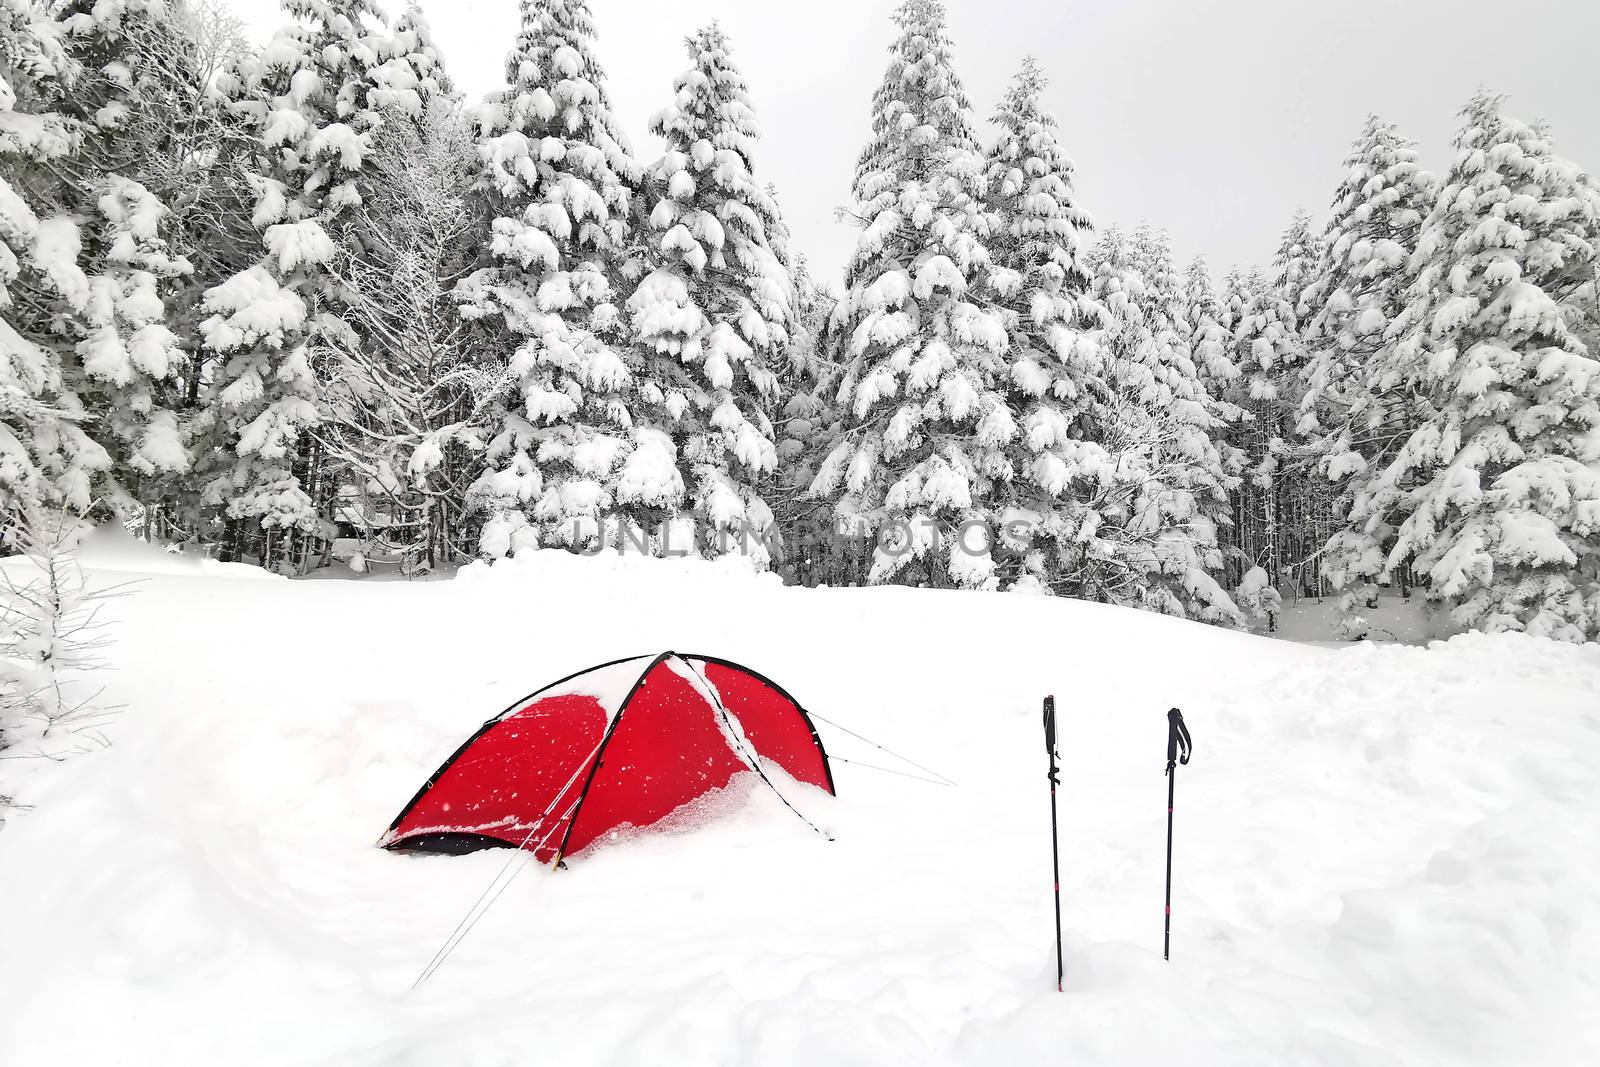 The red tent and hiking sticks, natural snow hill in Japan Yatsugatake mountains
